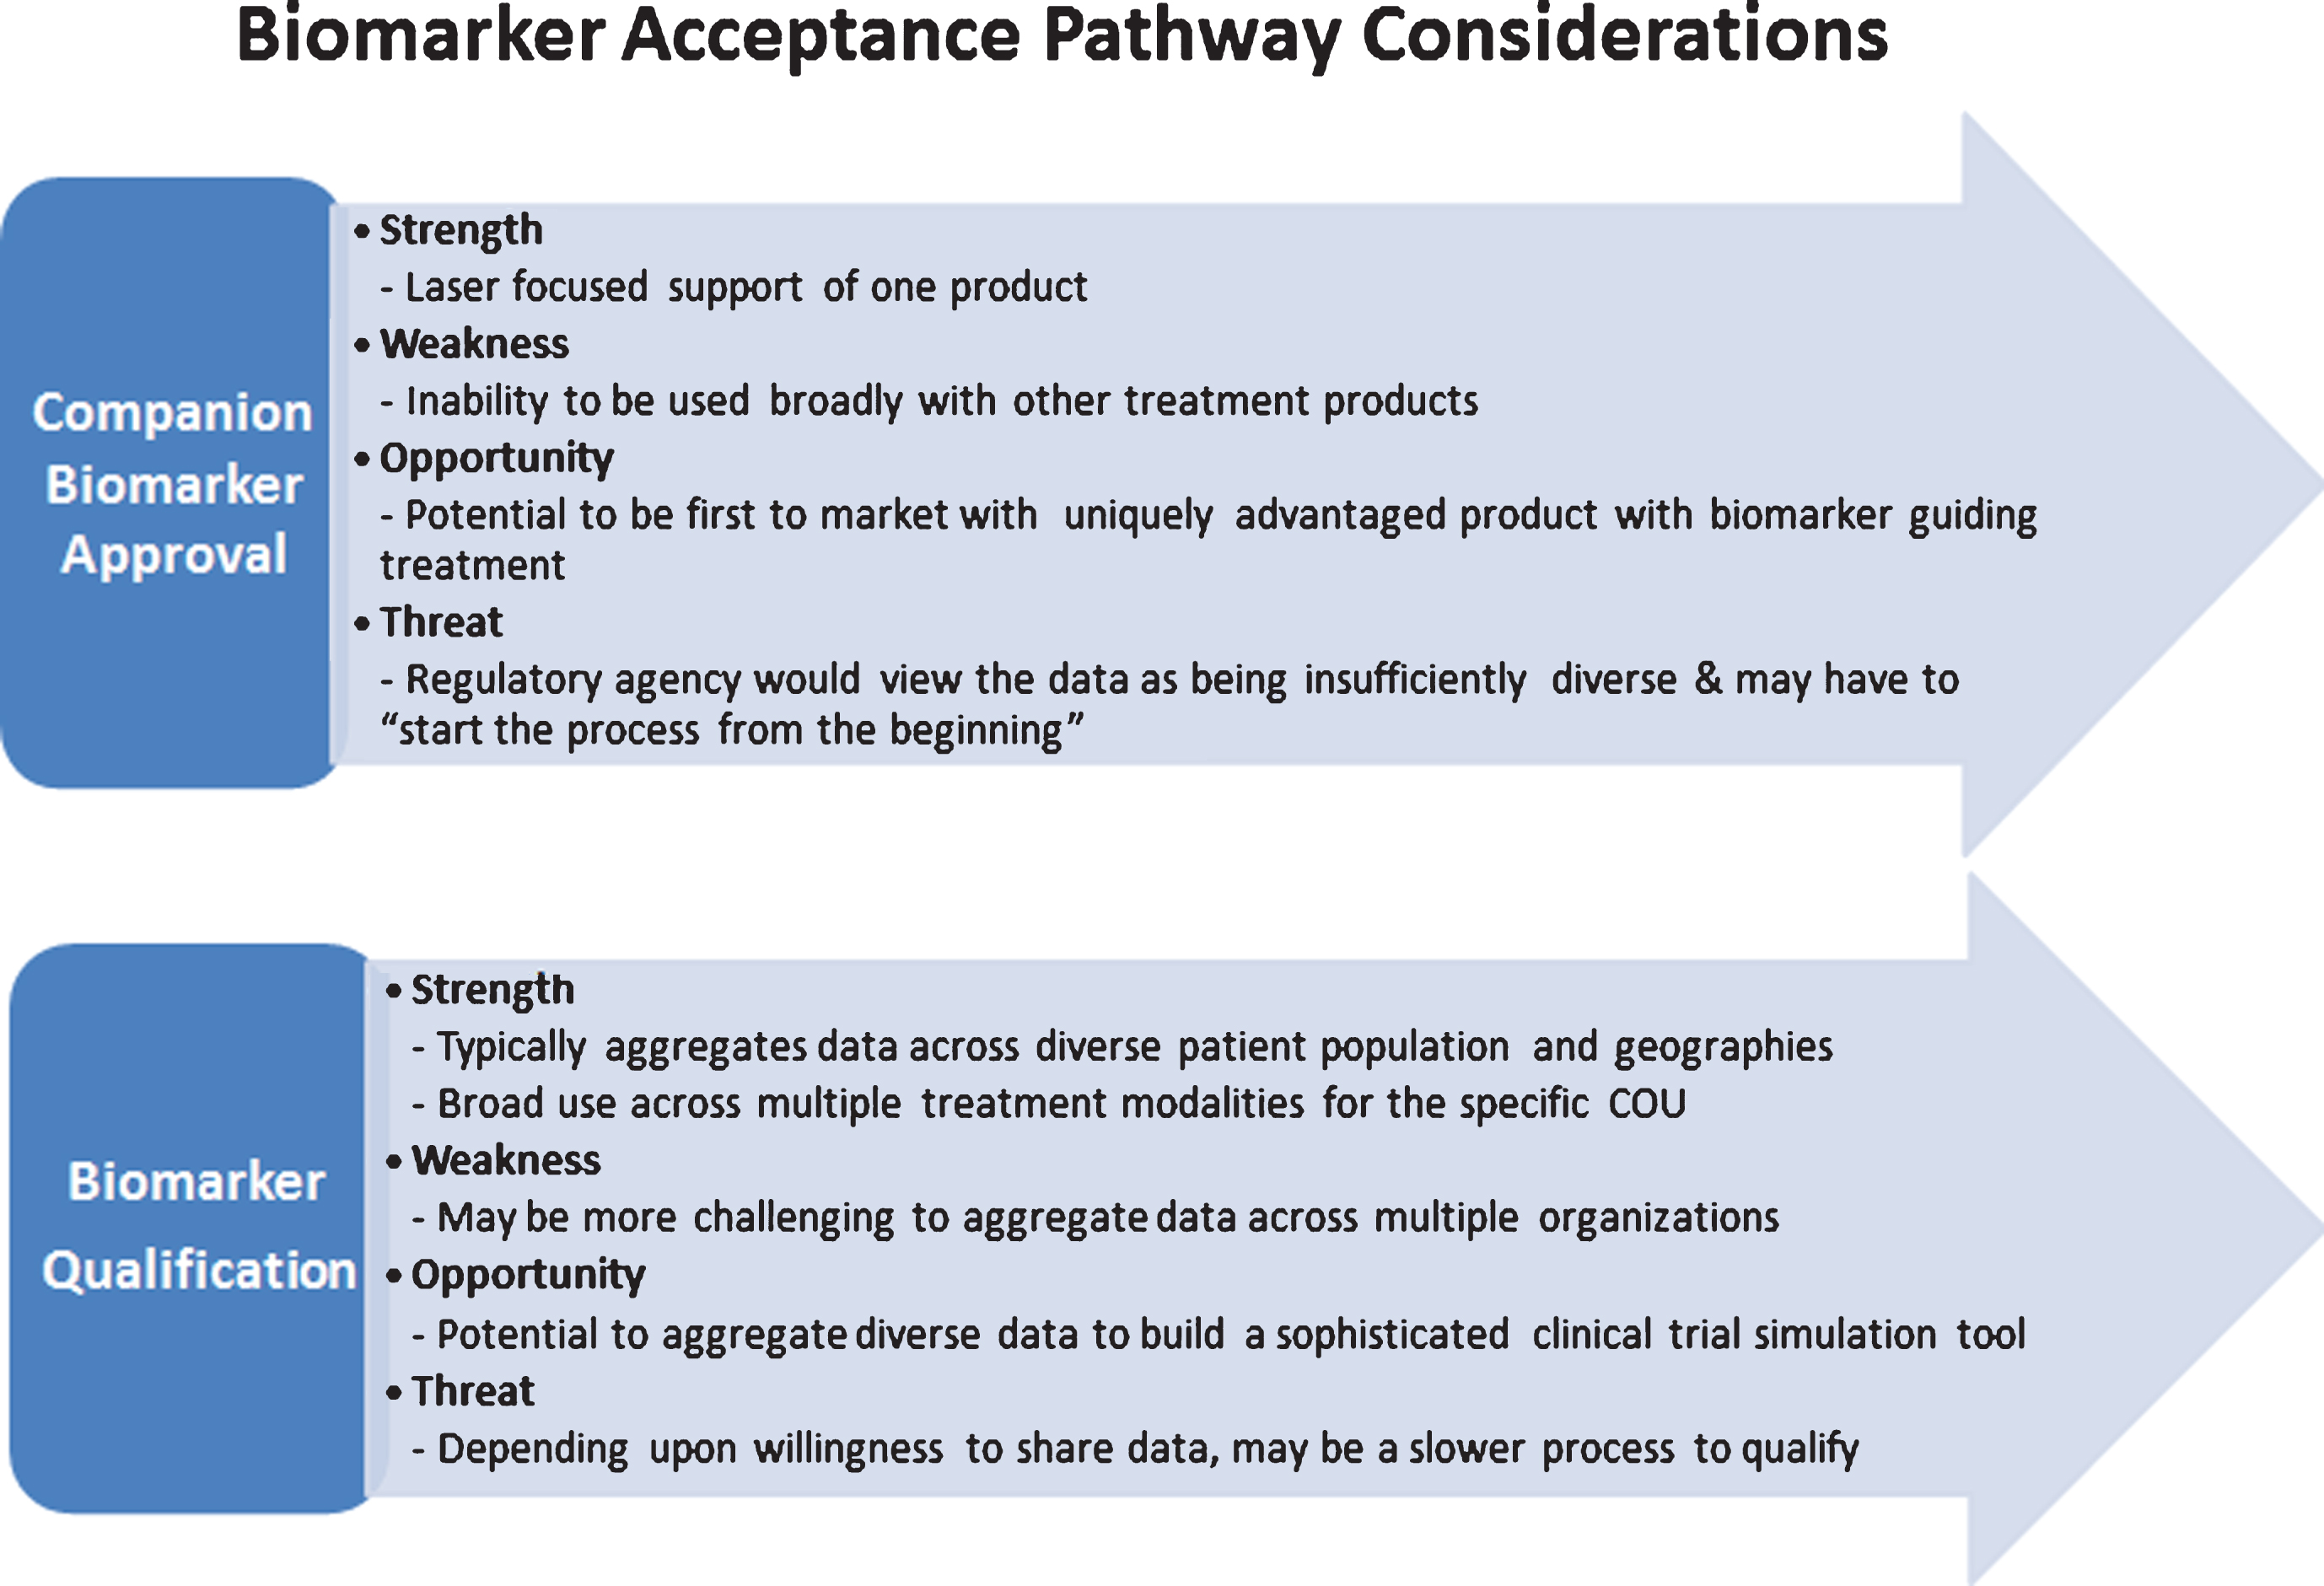 There are two independent biomarker acceptance pathways through which biomarkers can be integrated into drug development for a specific COU. The first is typically sponsored by a single company, and is focused on delivering a companion diagnostic assay that supports a single therapeutic product. The second is typically done collectively by a consortium that provides a diverse range of clinical data across multiple studies to support a specific COU that would have applicability across multiple treatment modalities. This figure summarizes the high-level considerations of each pathway.